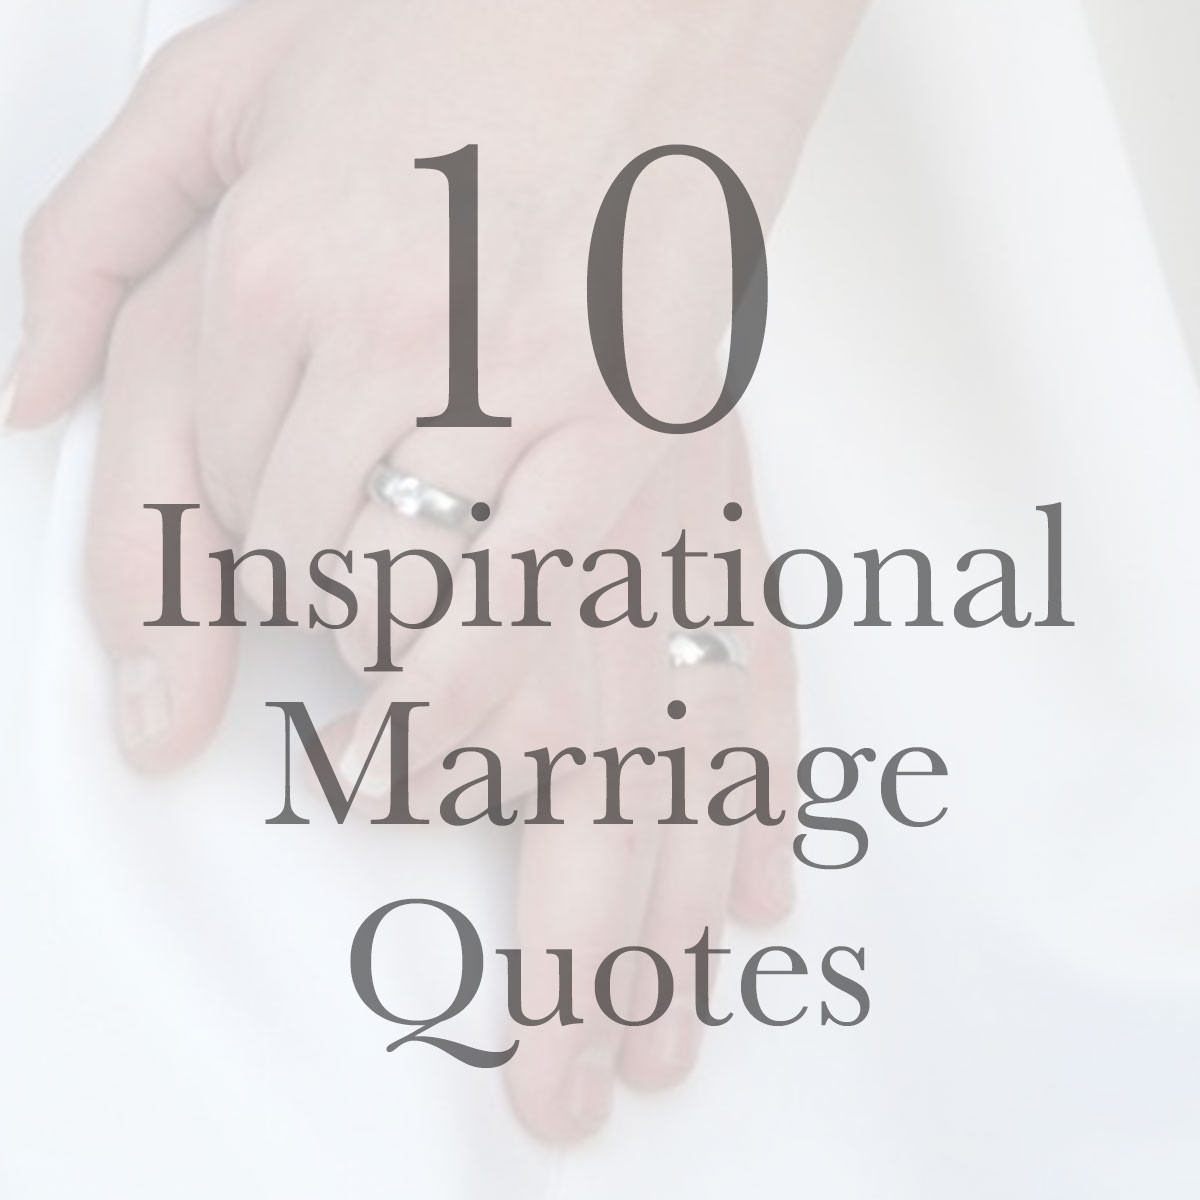 New Marriage Quote
 Positive Marriage Quotes & Love Quotes